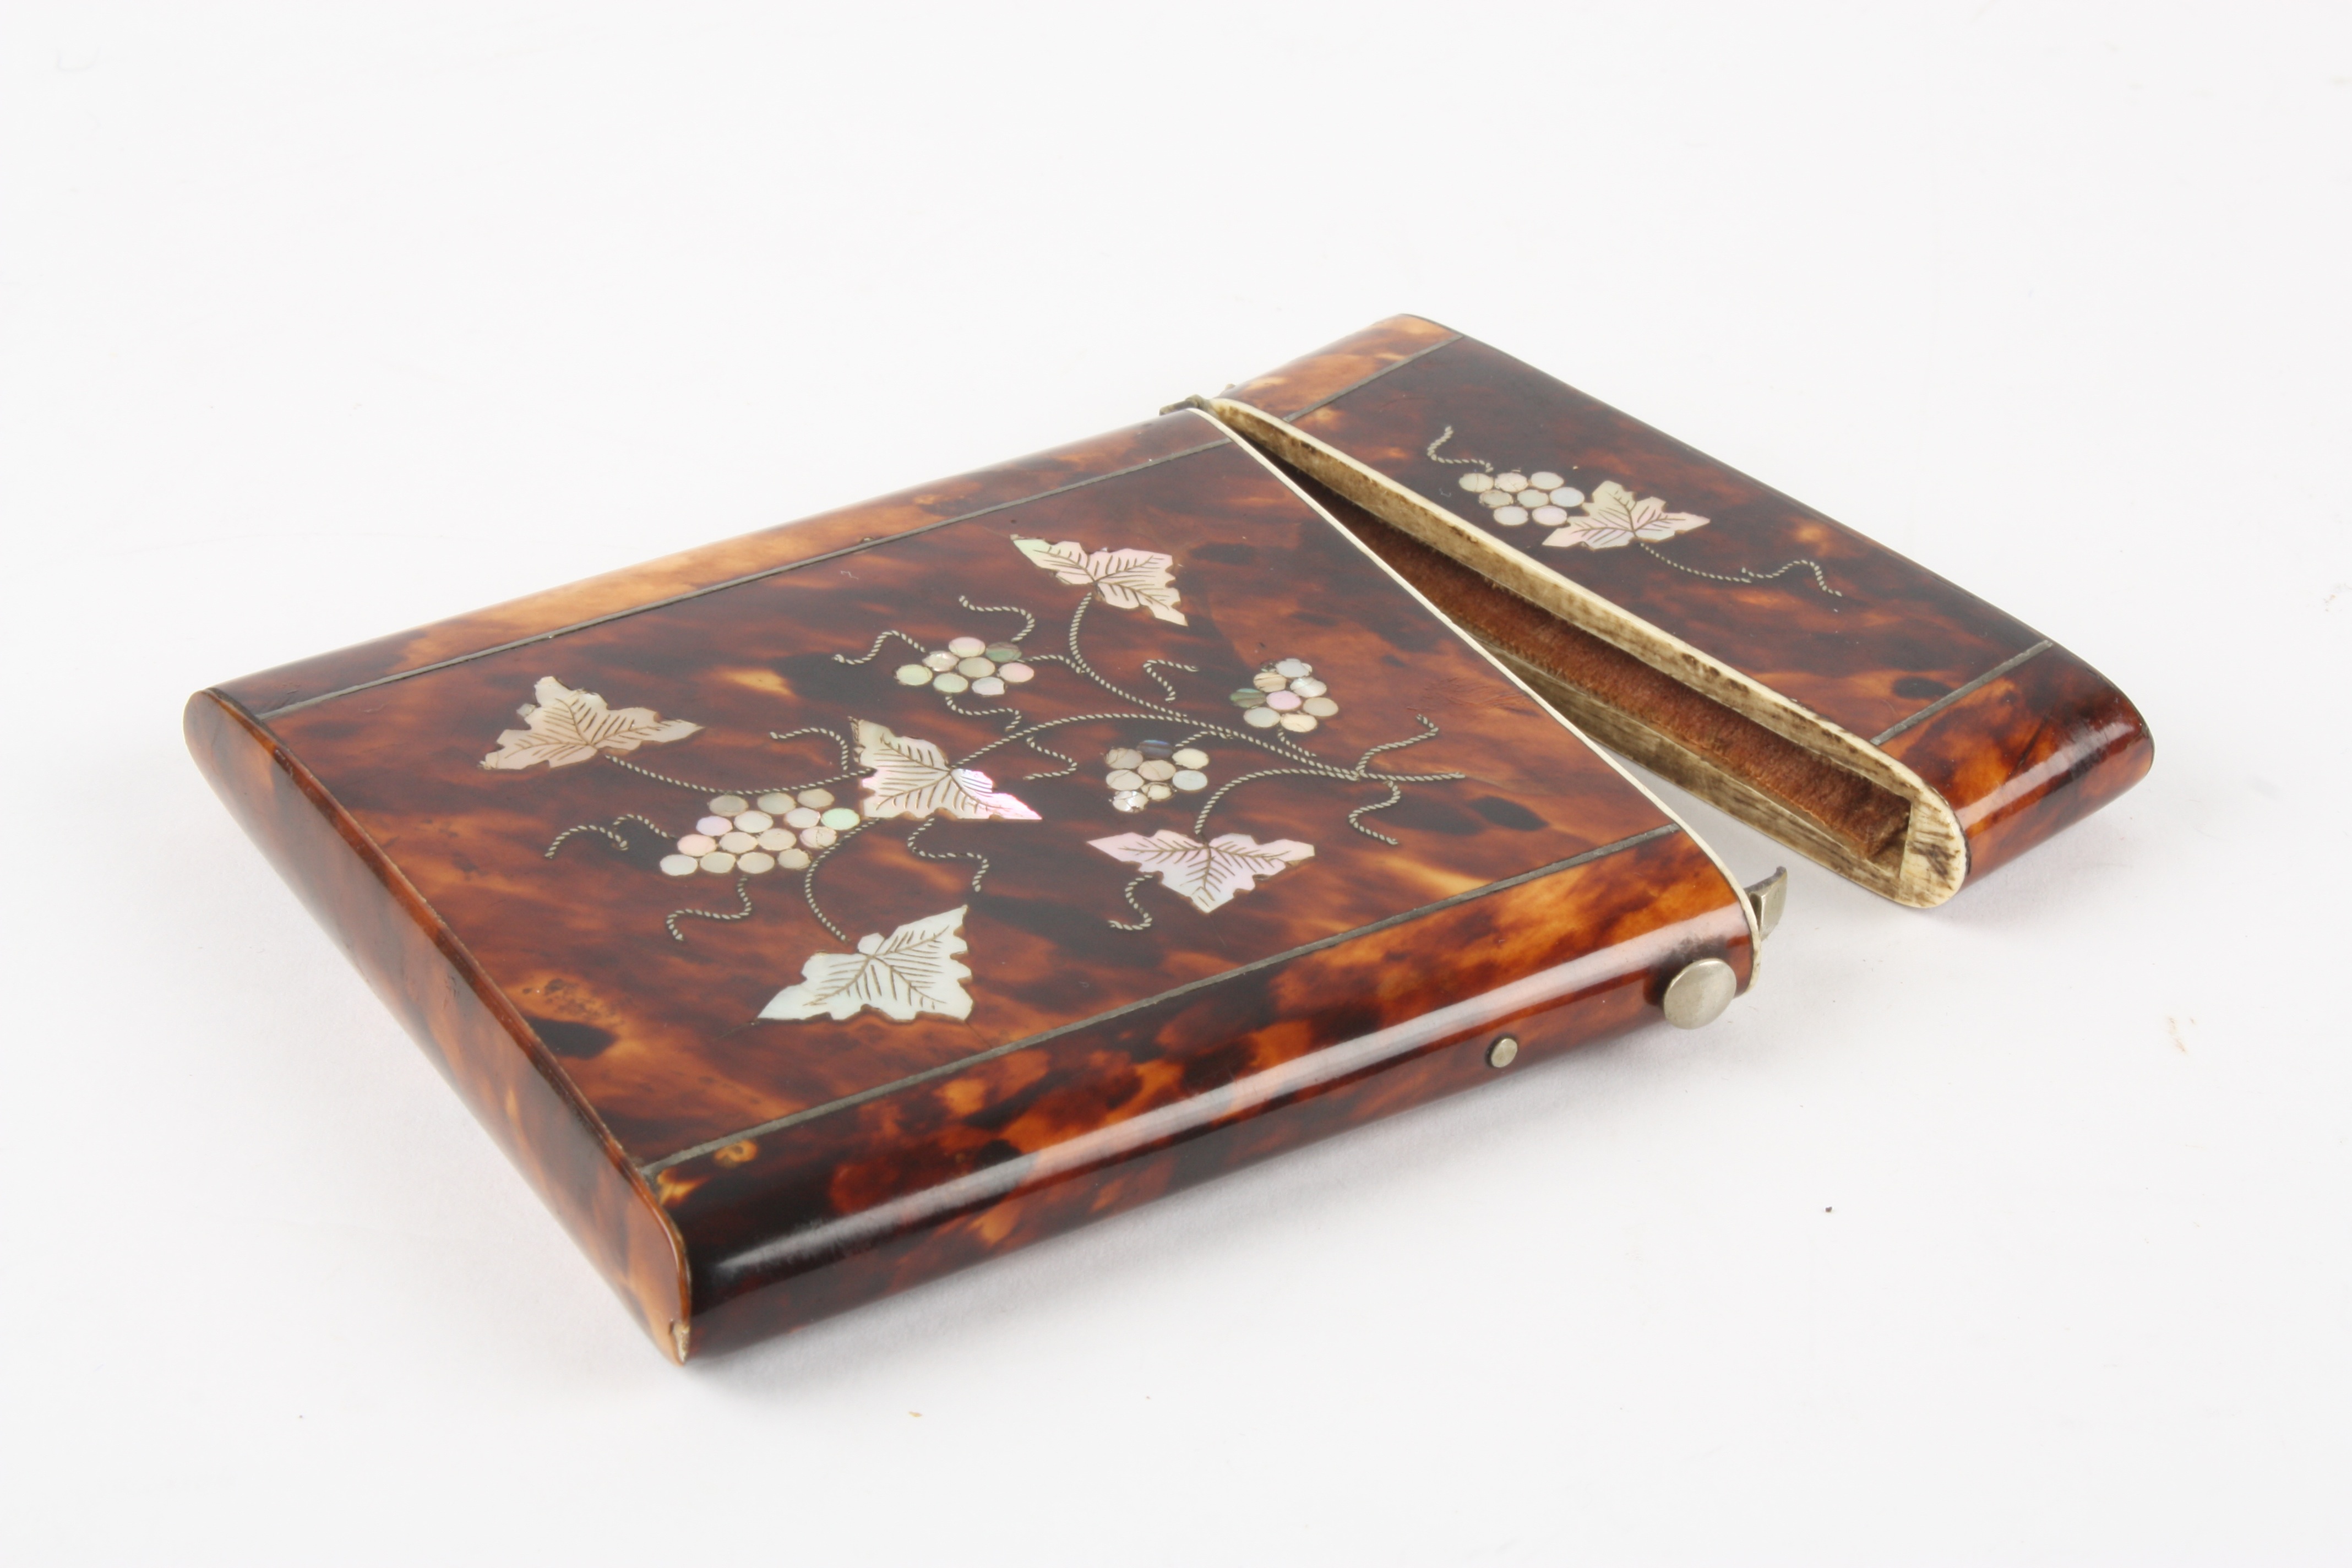 A Victorian tortoiseshell and mother of pearl card case
inlaid with grapes and vines on both sides - Image 3 of 3